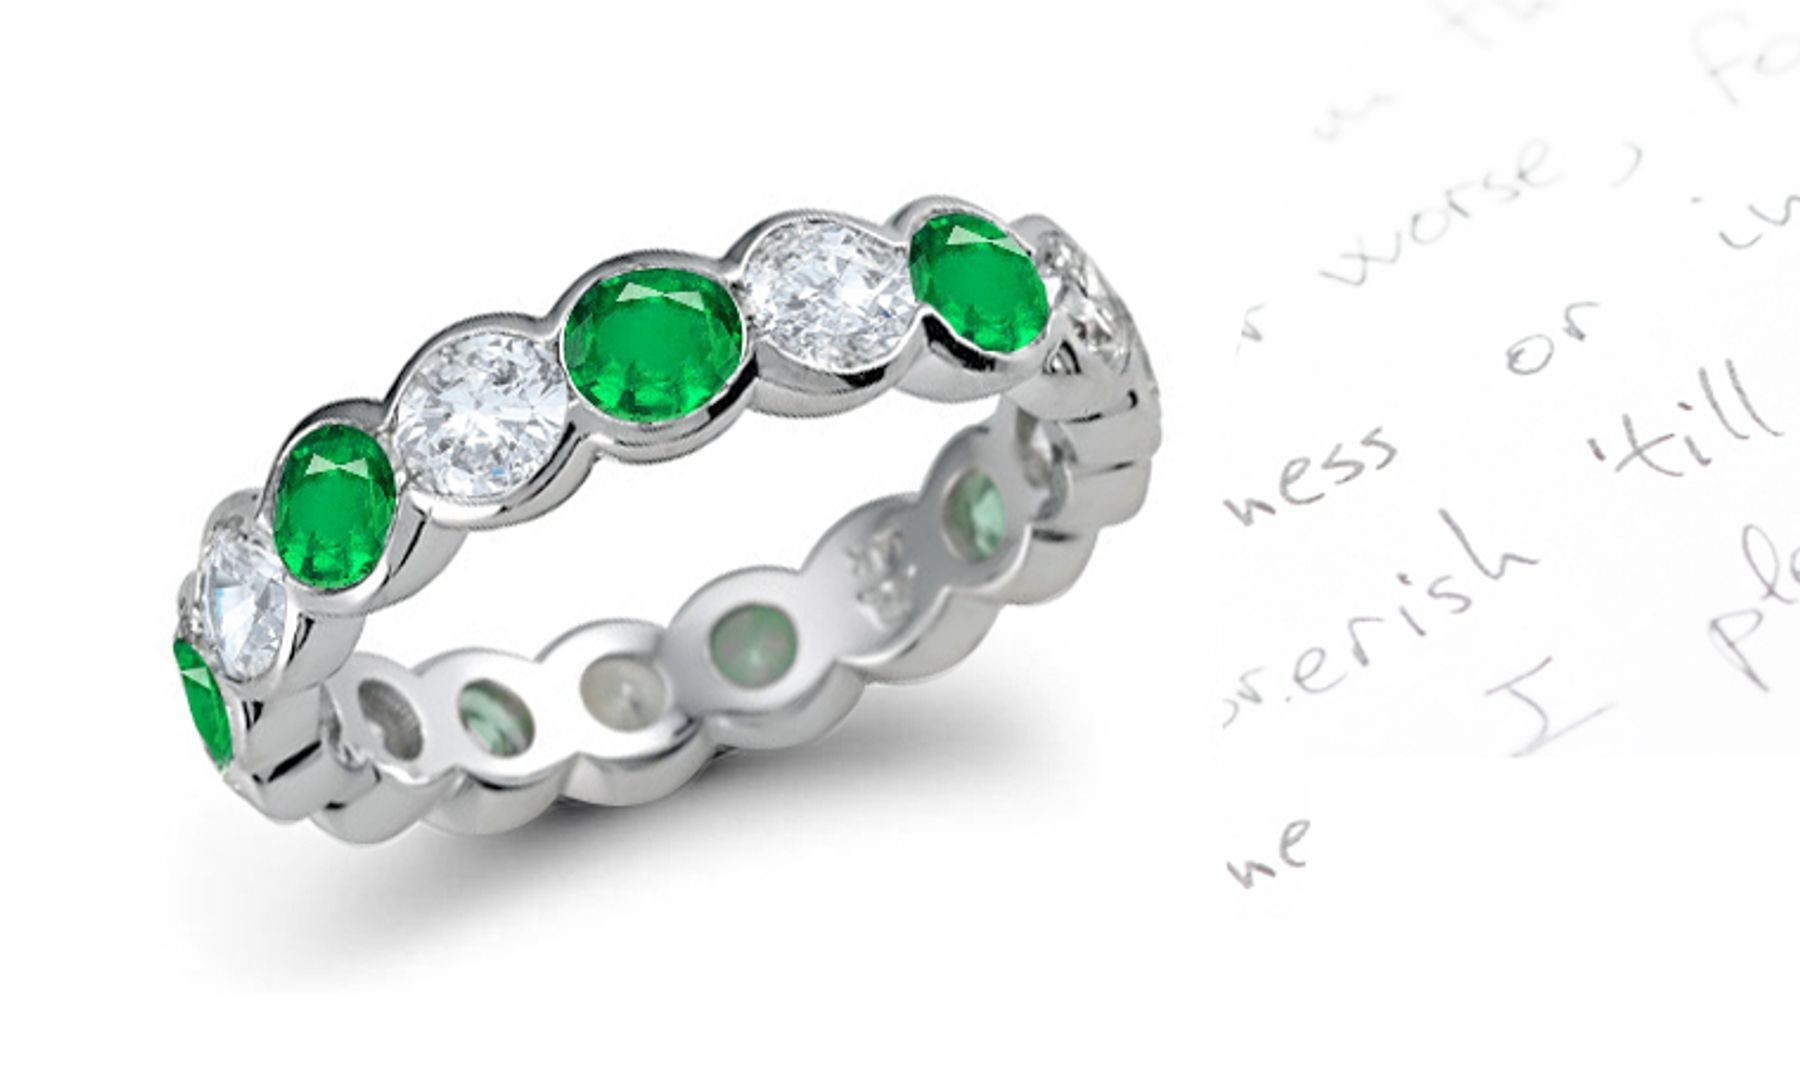 Forever Yours Emerald Jewelry Eternity Rings: Custom Made Emerald & Diamond Bezel Set in White Gold.